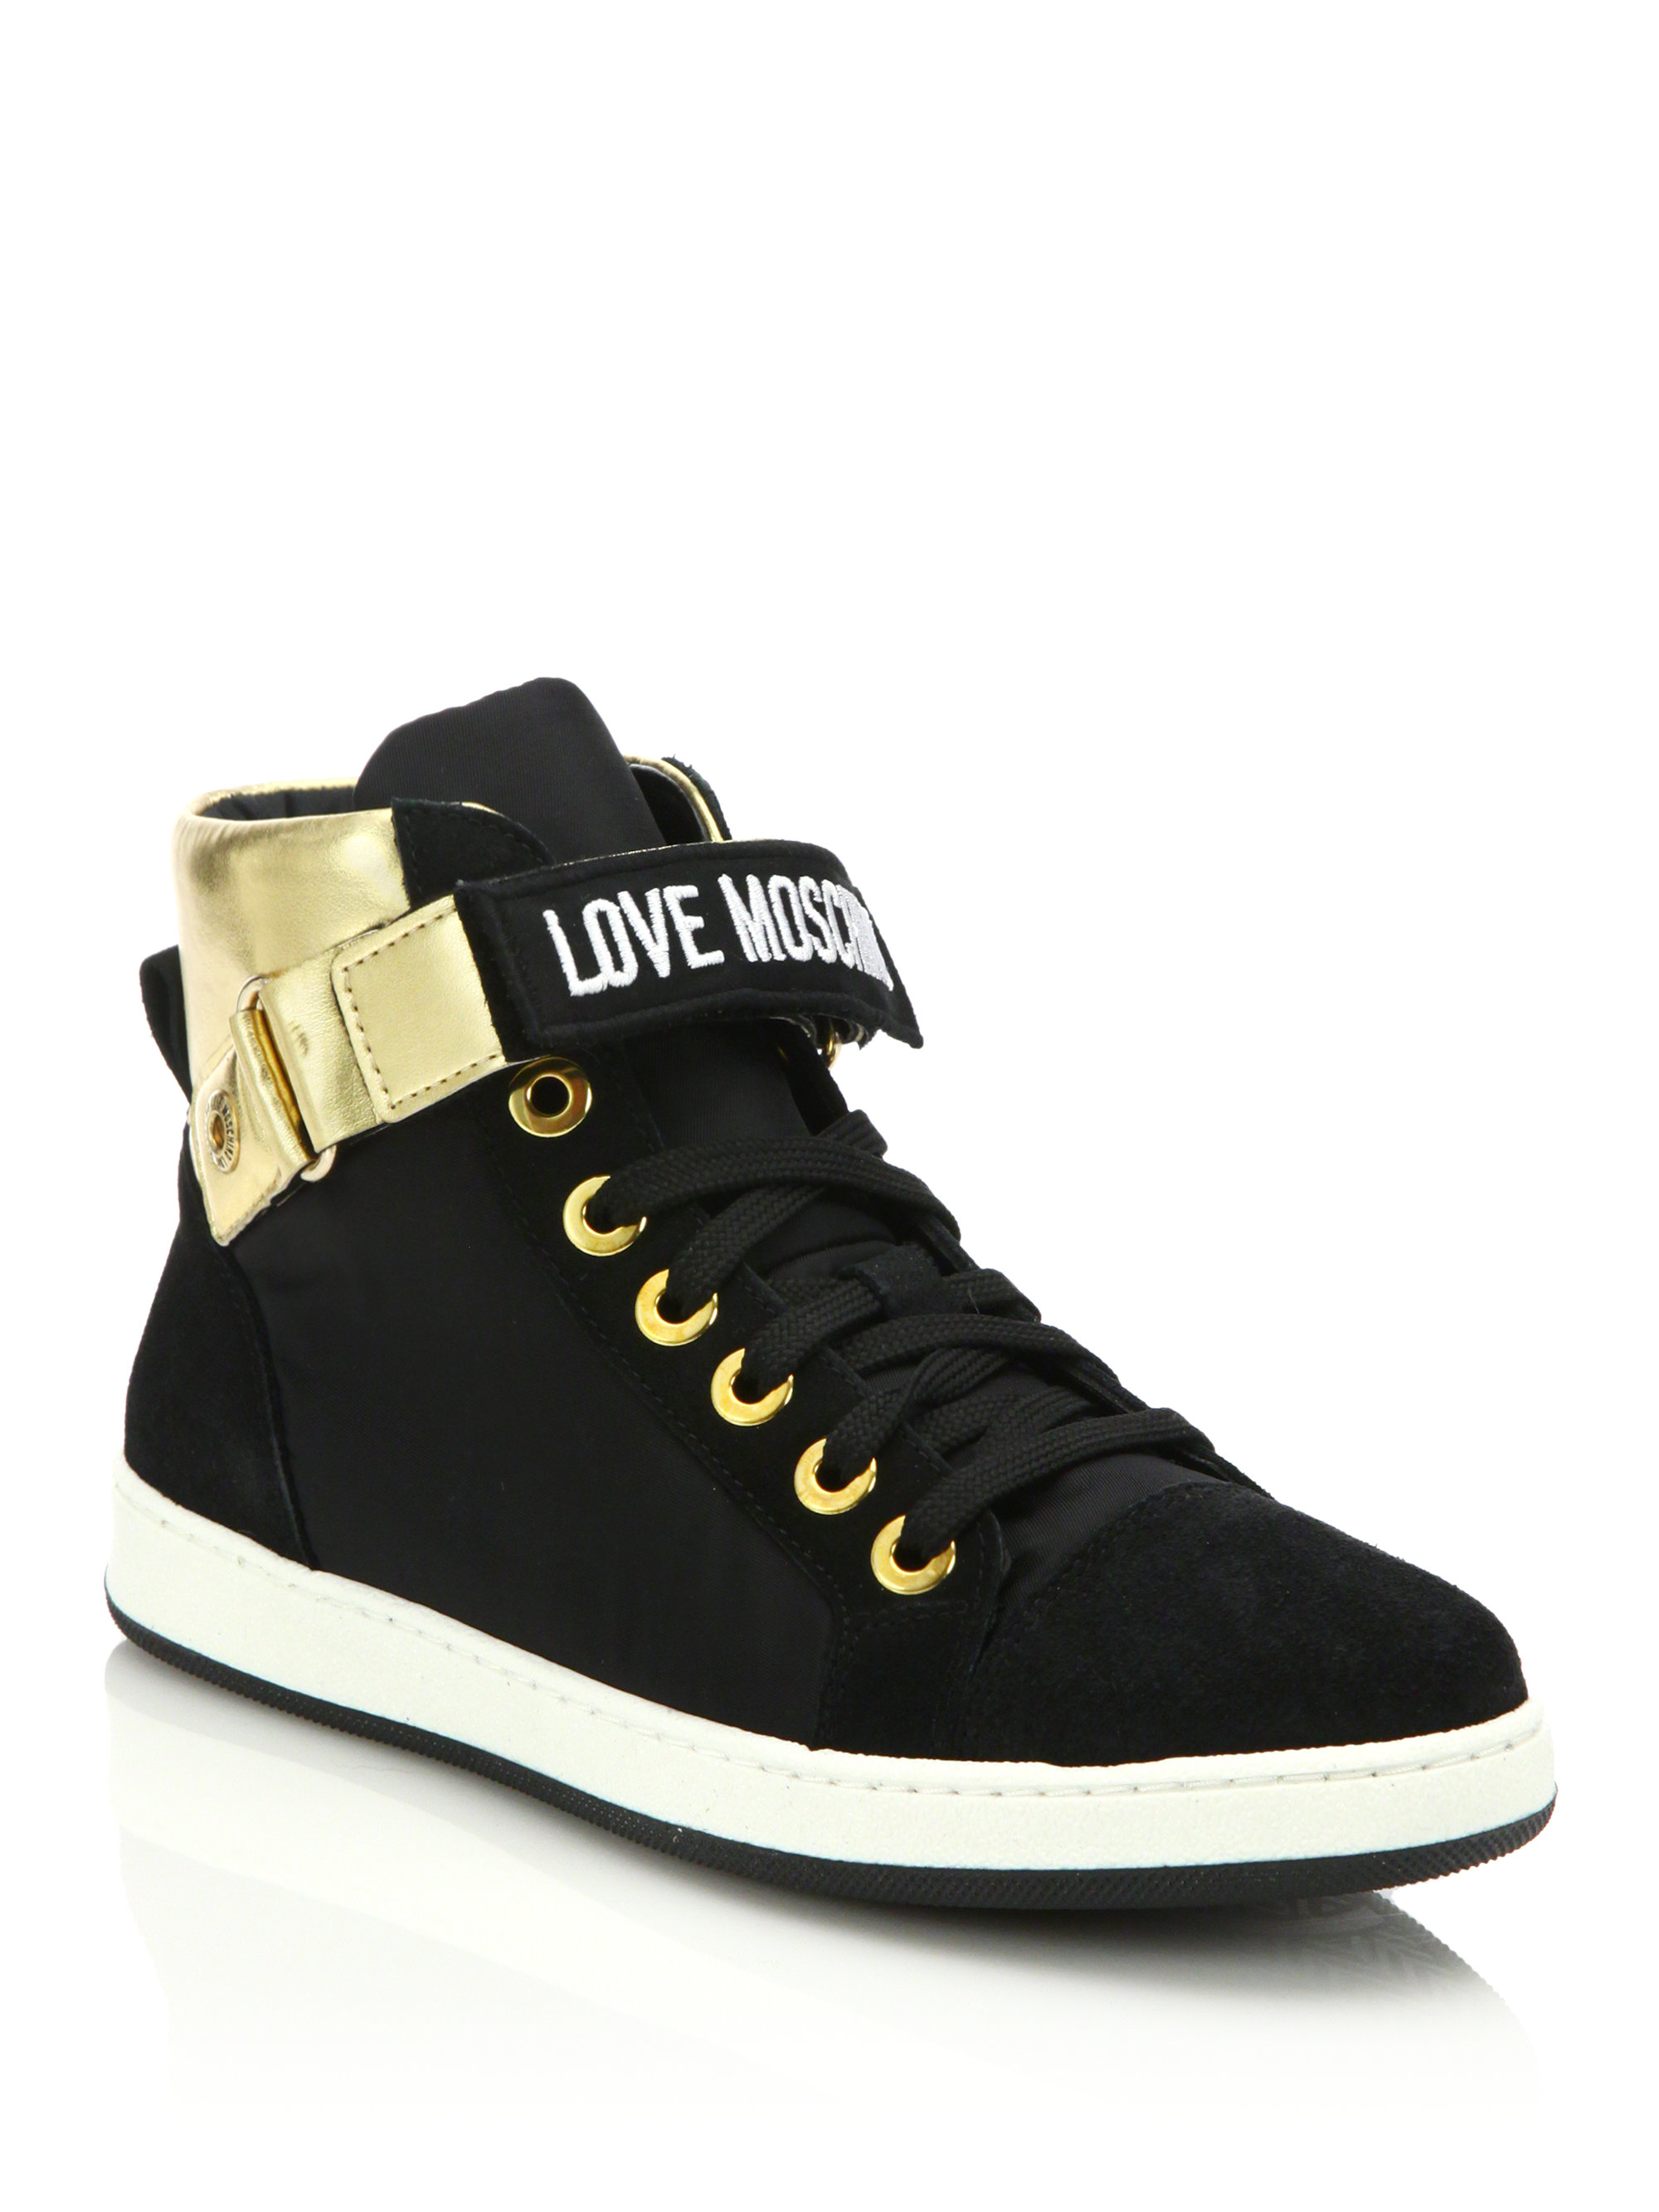 Lyst - Love Moschino Patched Metallic Leather & Nylon Lace-up Sneakers ...